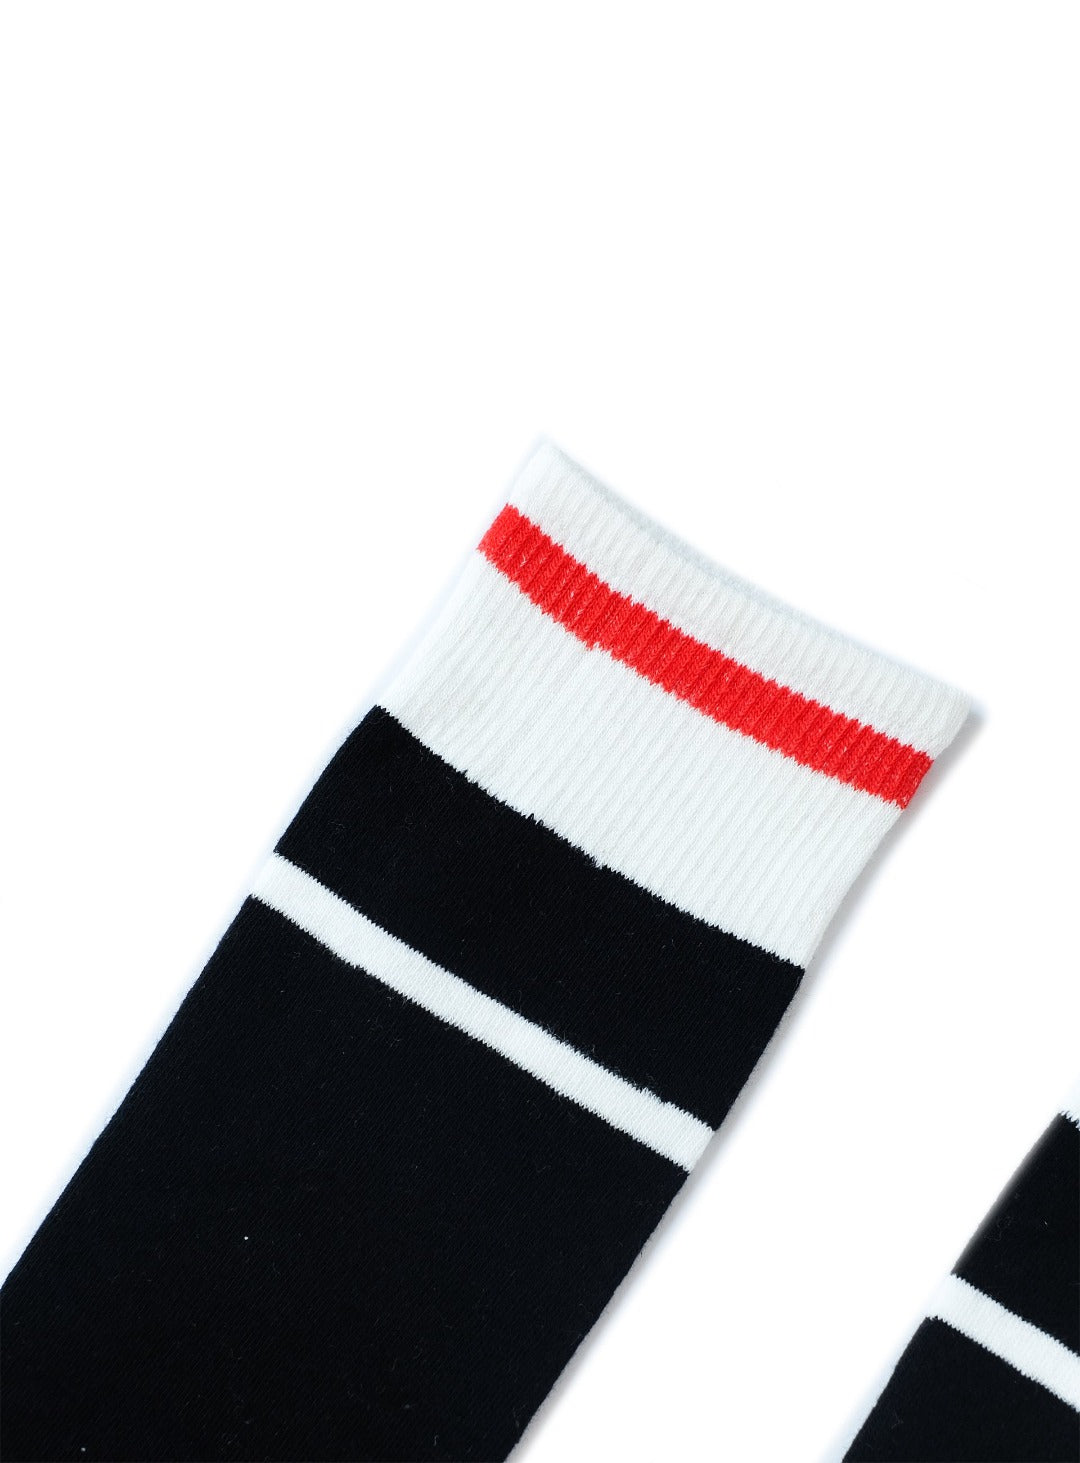 midi length black socks with white and red stripe